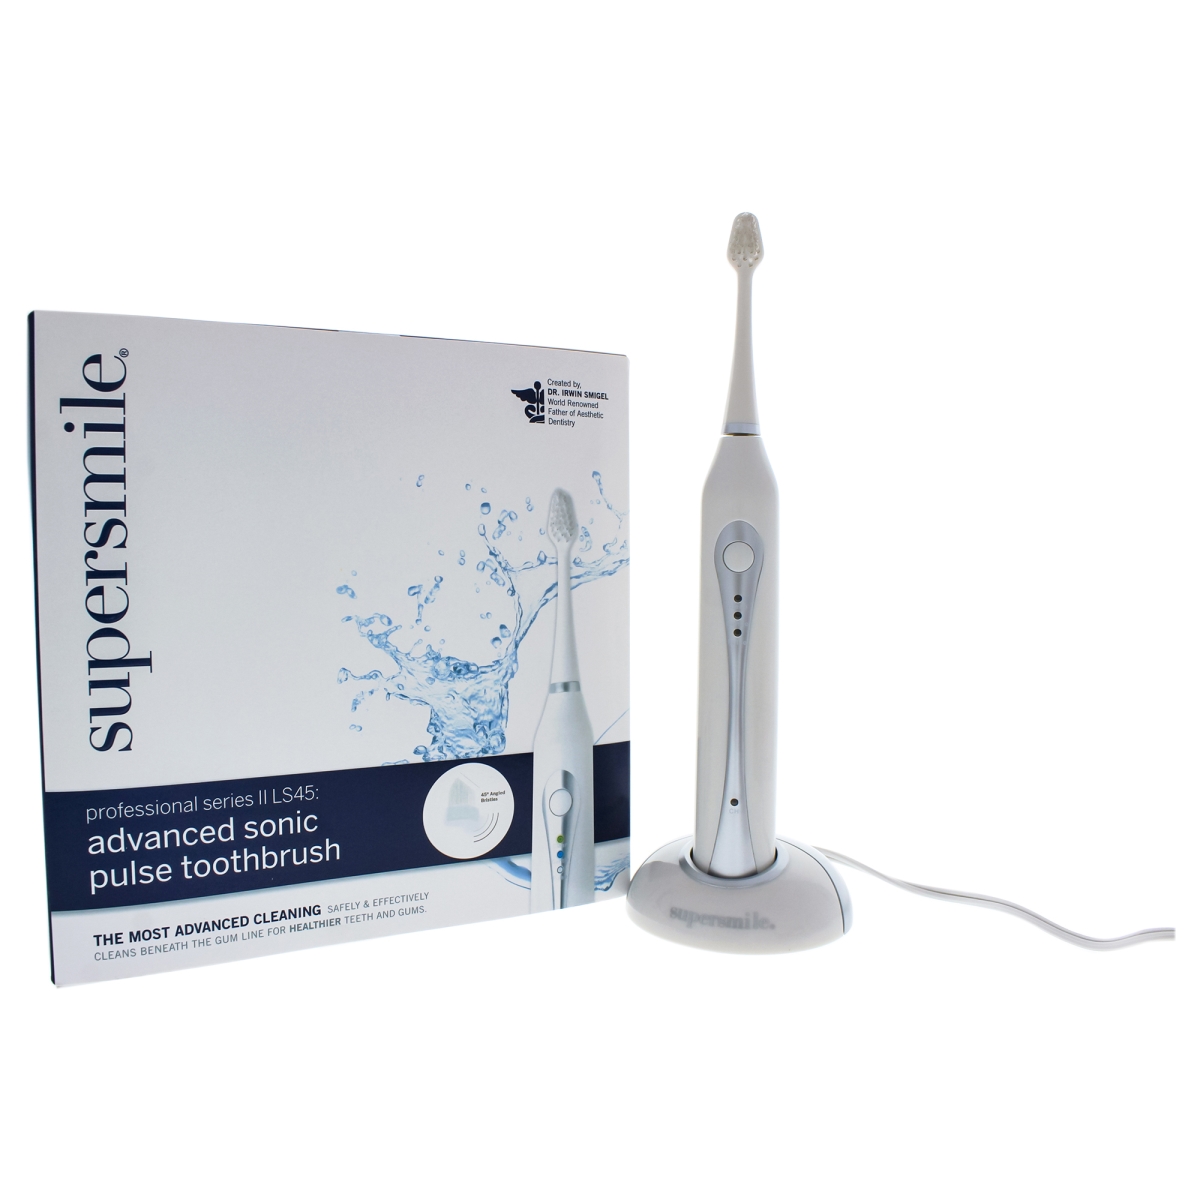 I0085417 Advanced Sonic Pulse Electric Toothbrush For Unisex